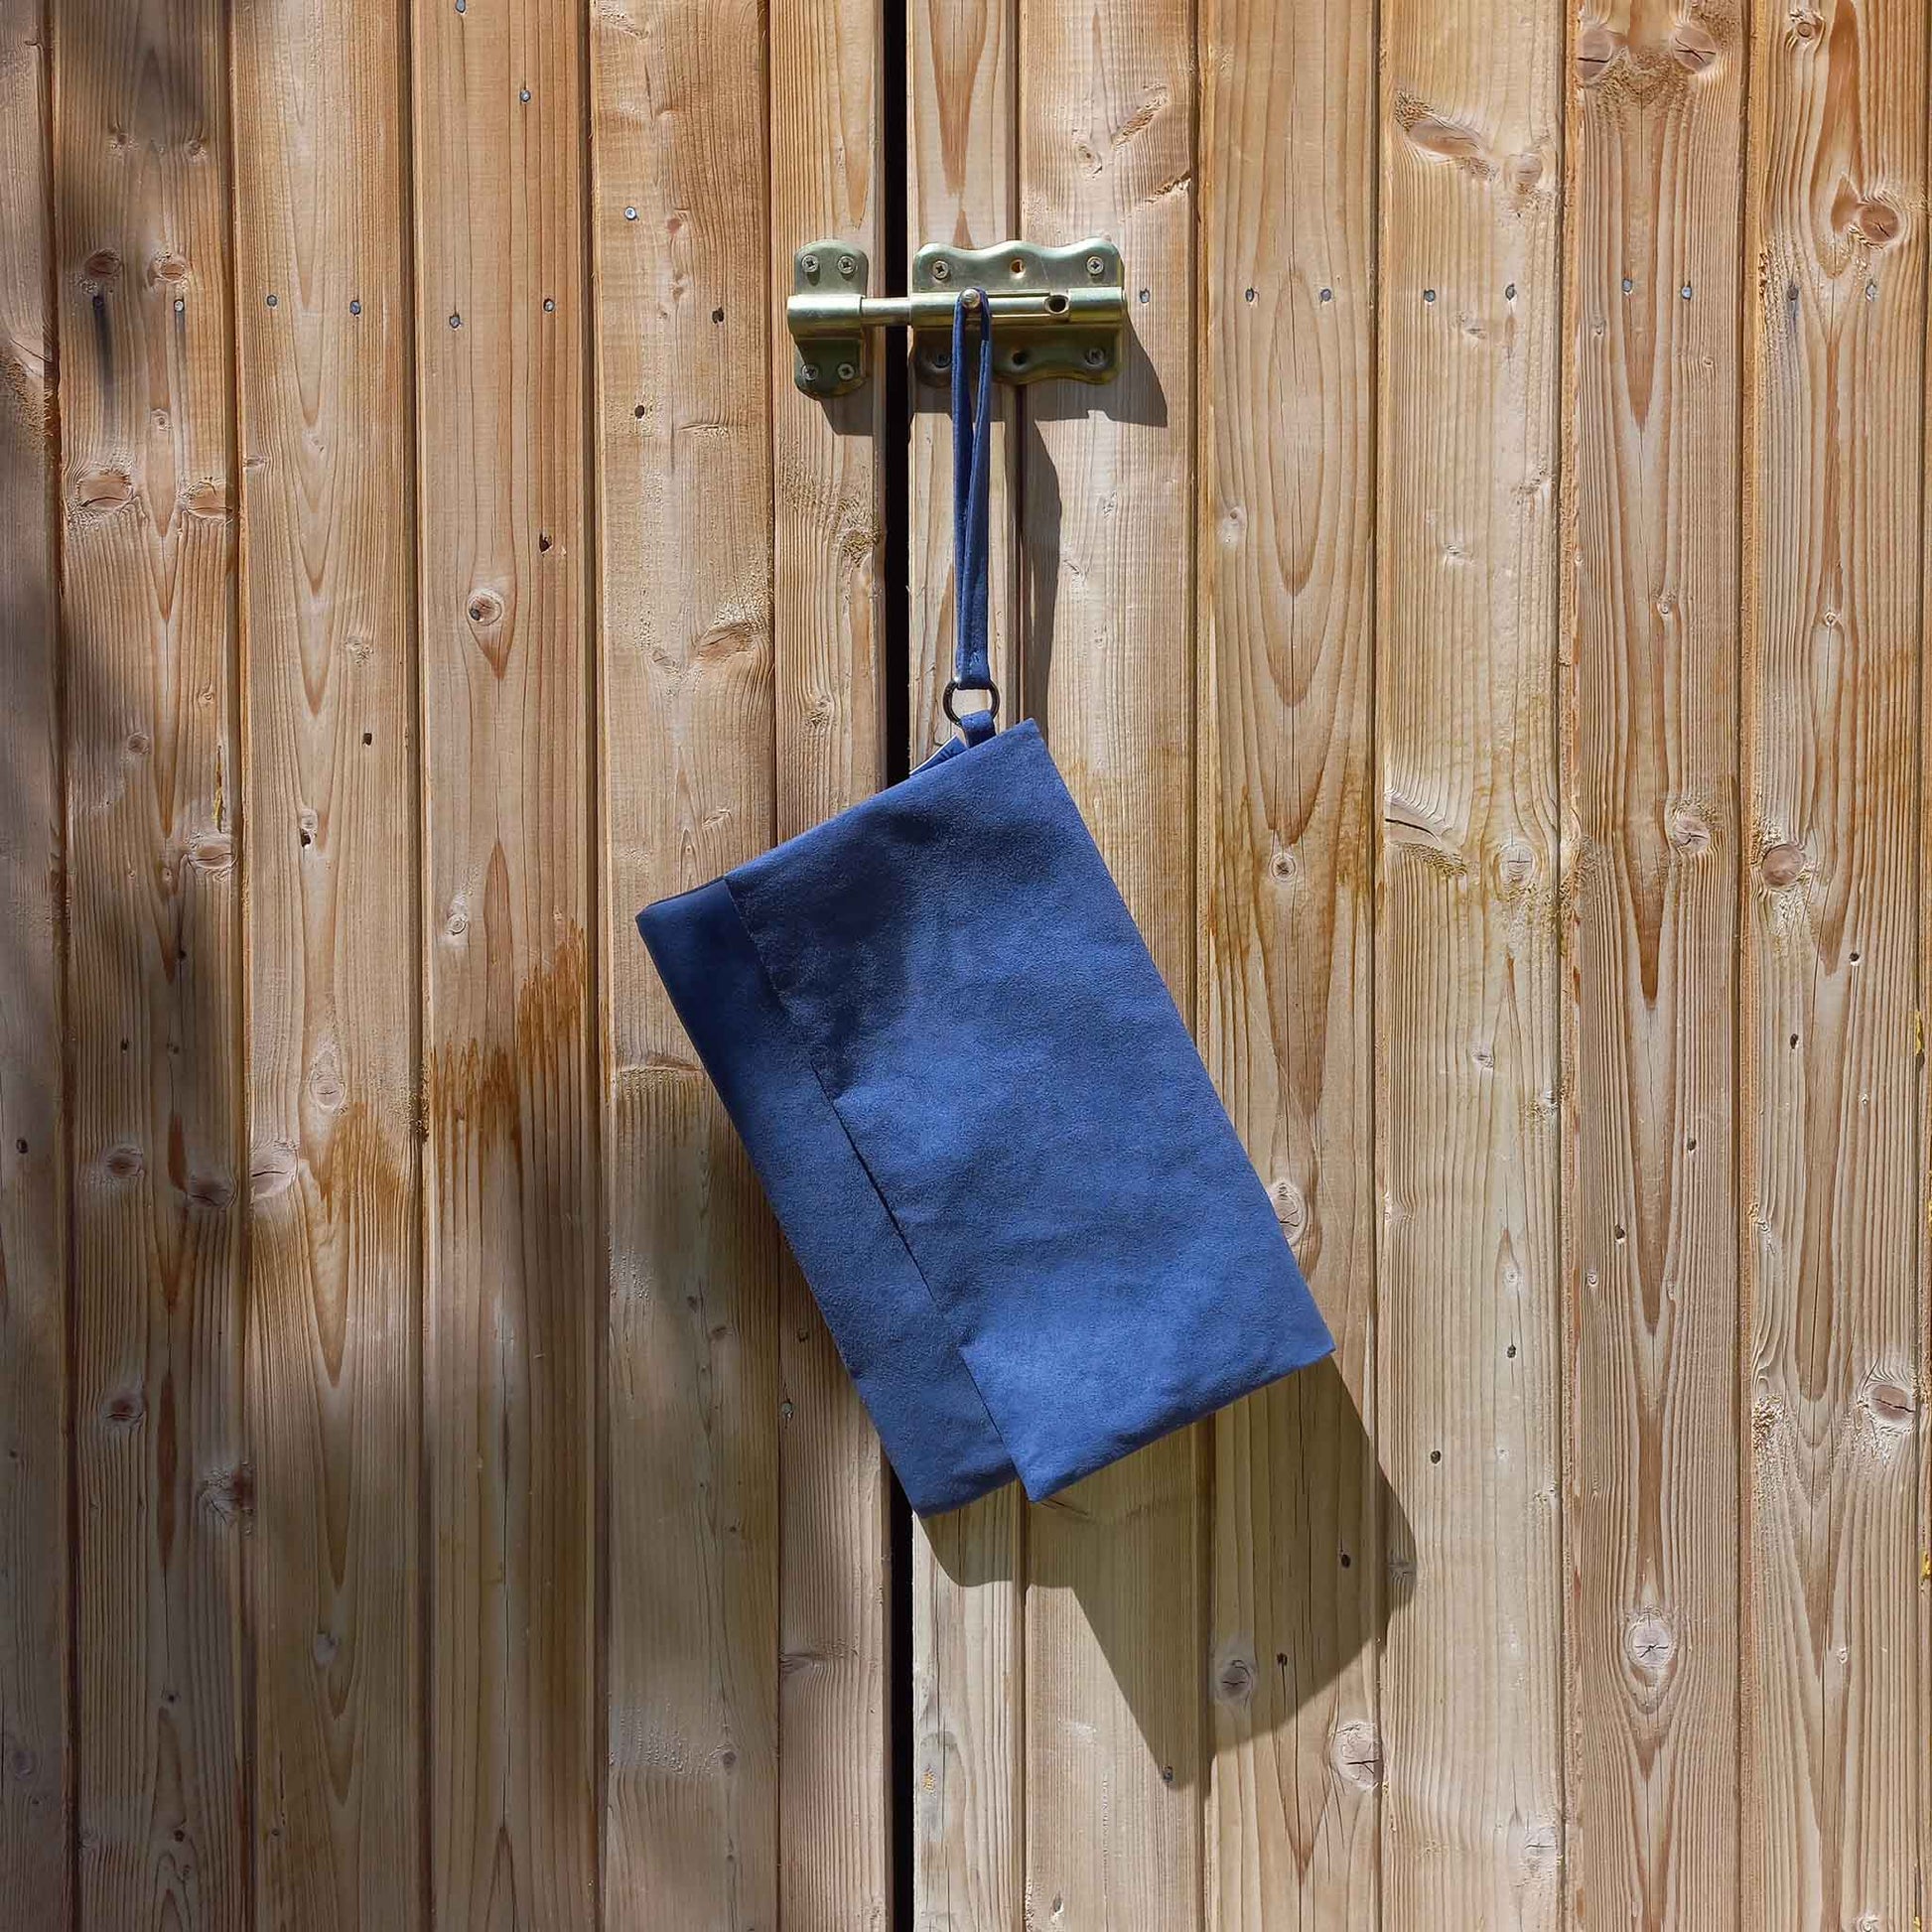 Blue suede clutch bag hanging from a shed lock